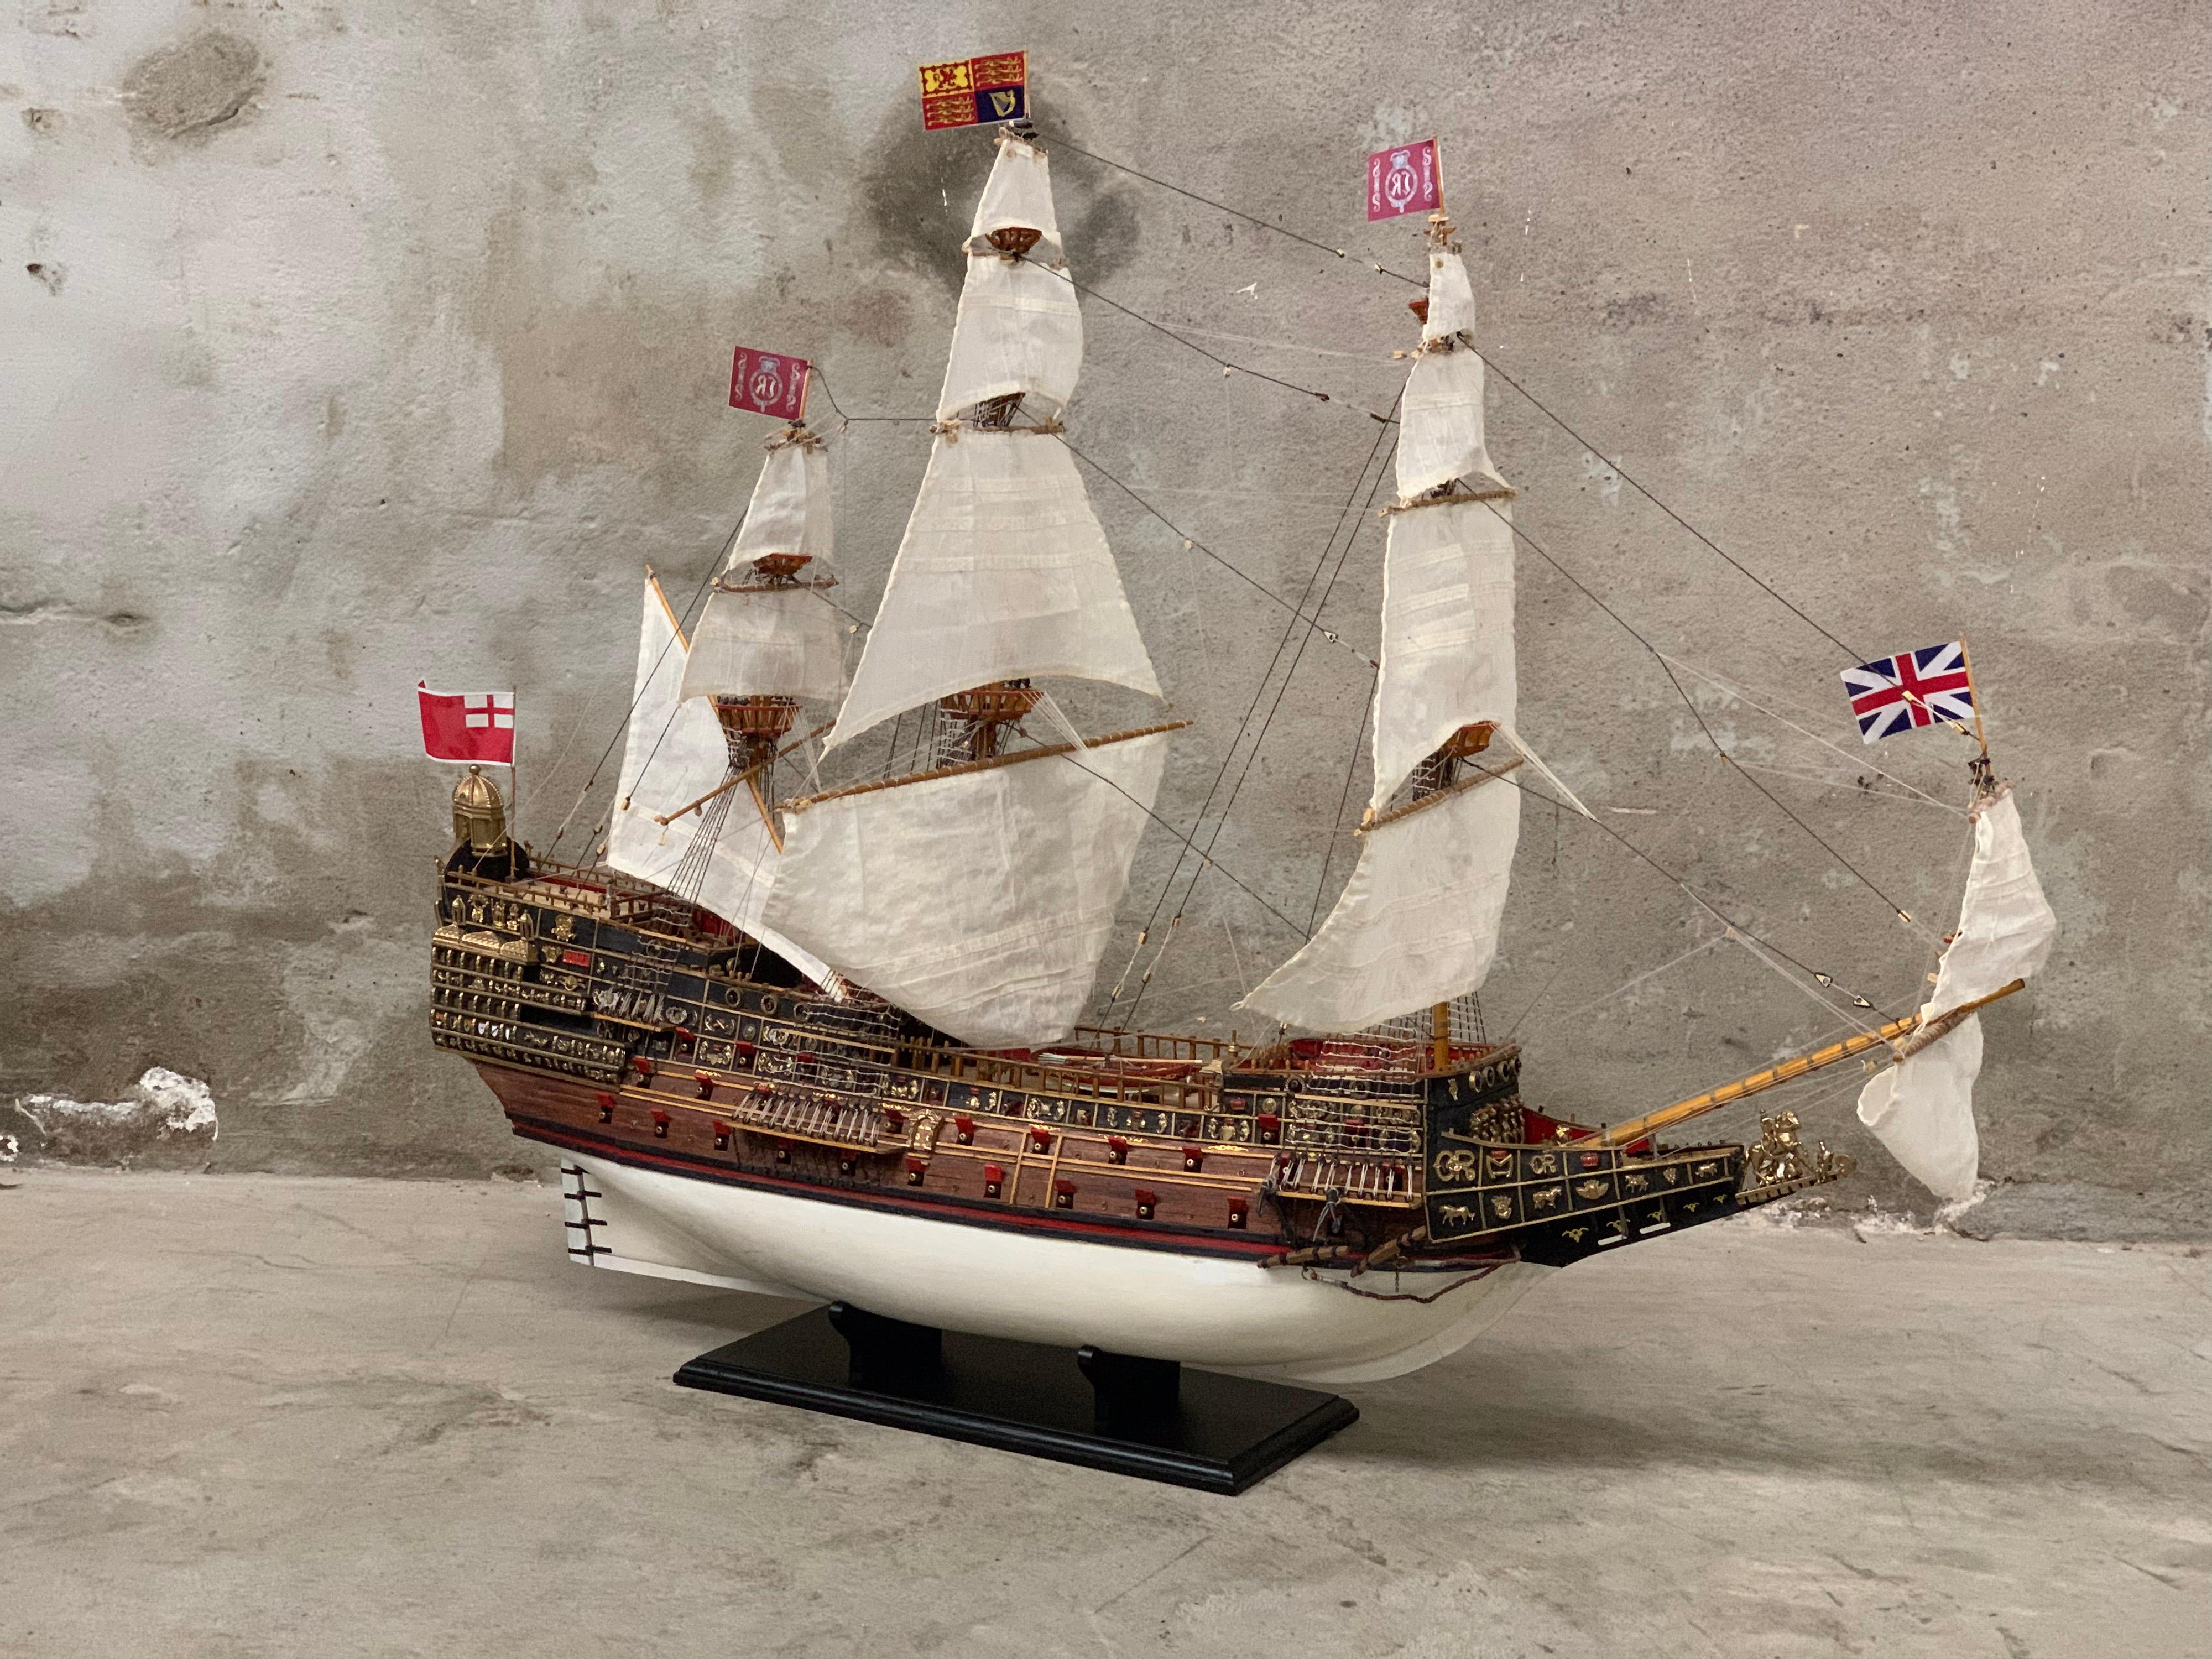 Beautifull hand built model of the famous Royal Navy H.M.S. Sovereign of the Seas. The details are absolutely stunning! Has been made in over 1500 hours in a period of 3 years in Breukelen in the Netherlands by a ship building enthusiast. The ship